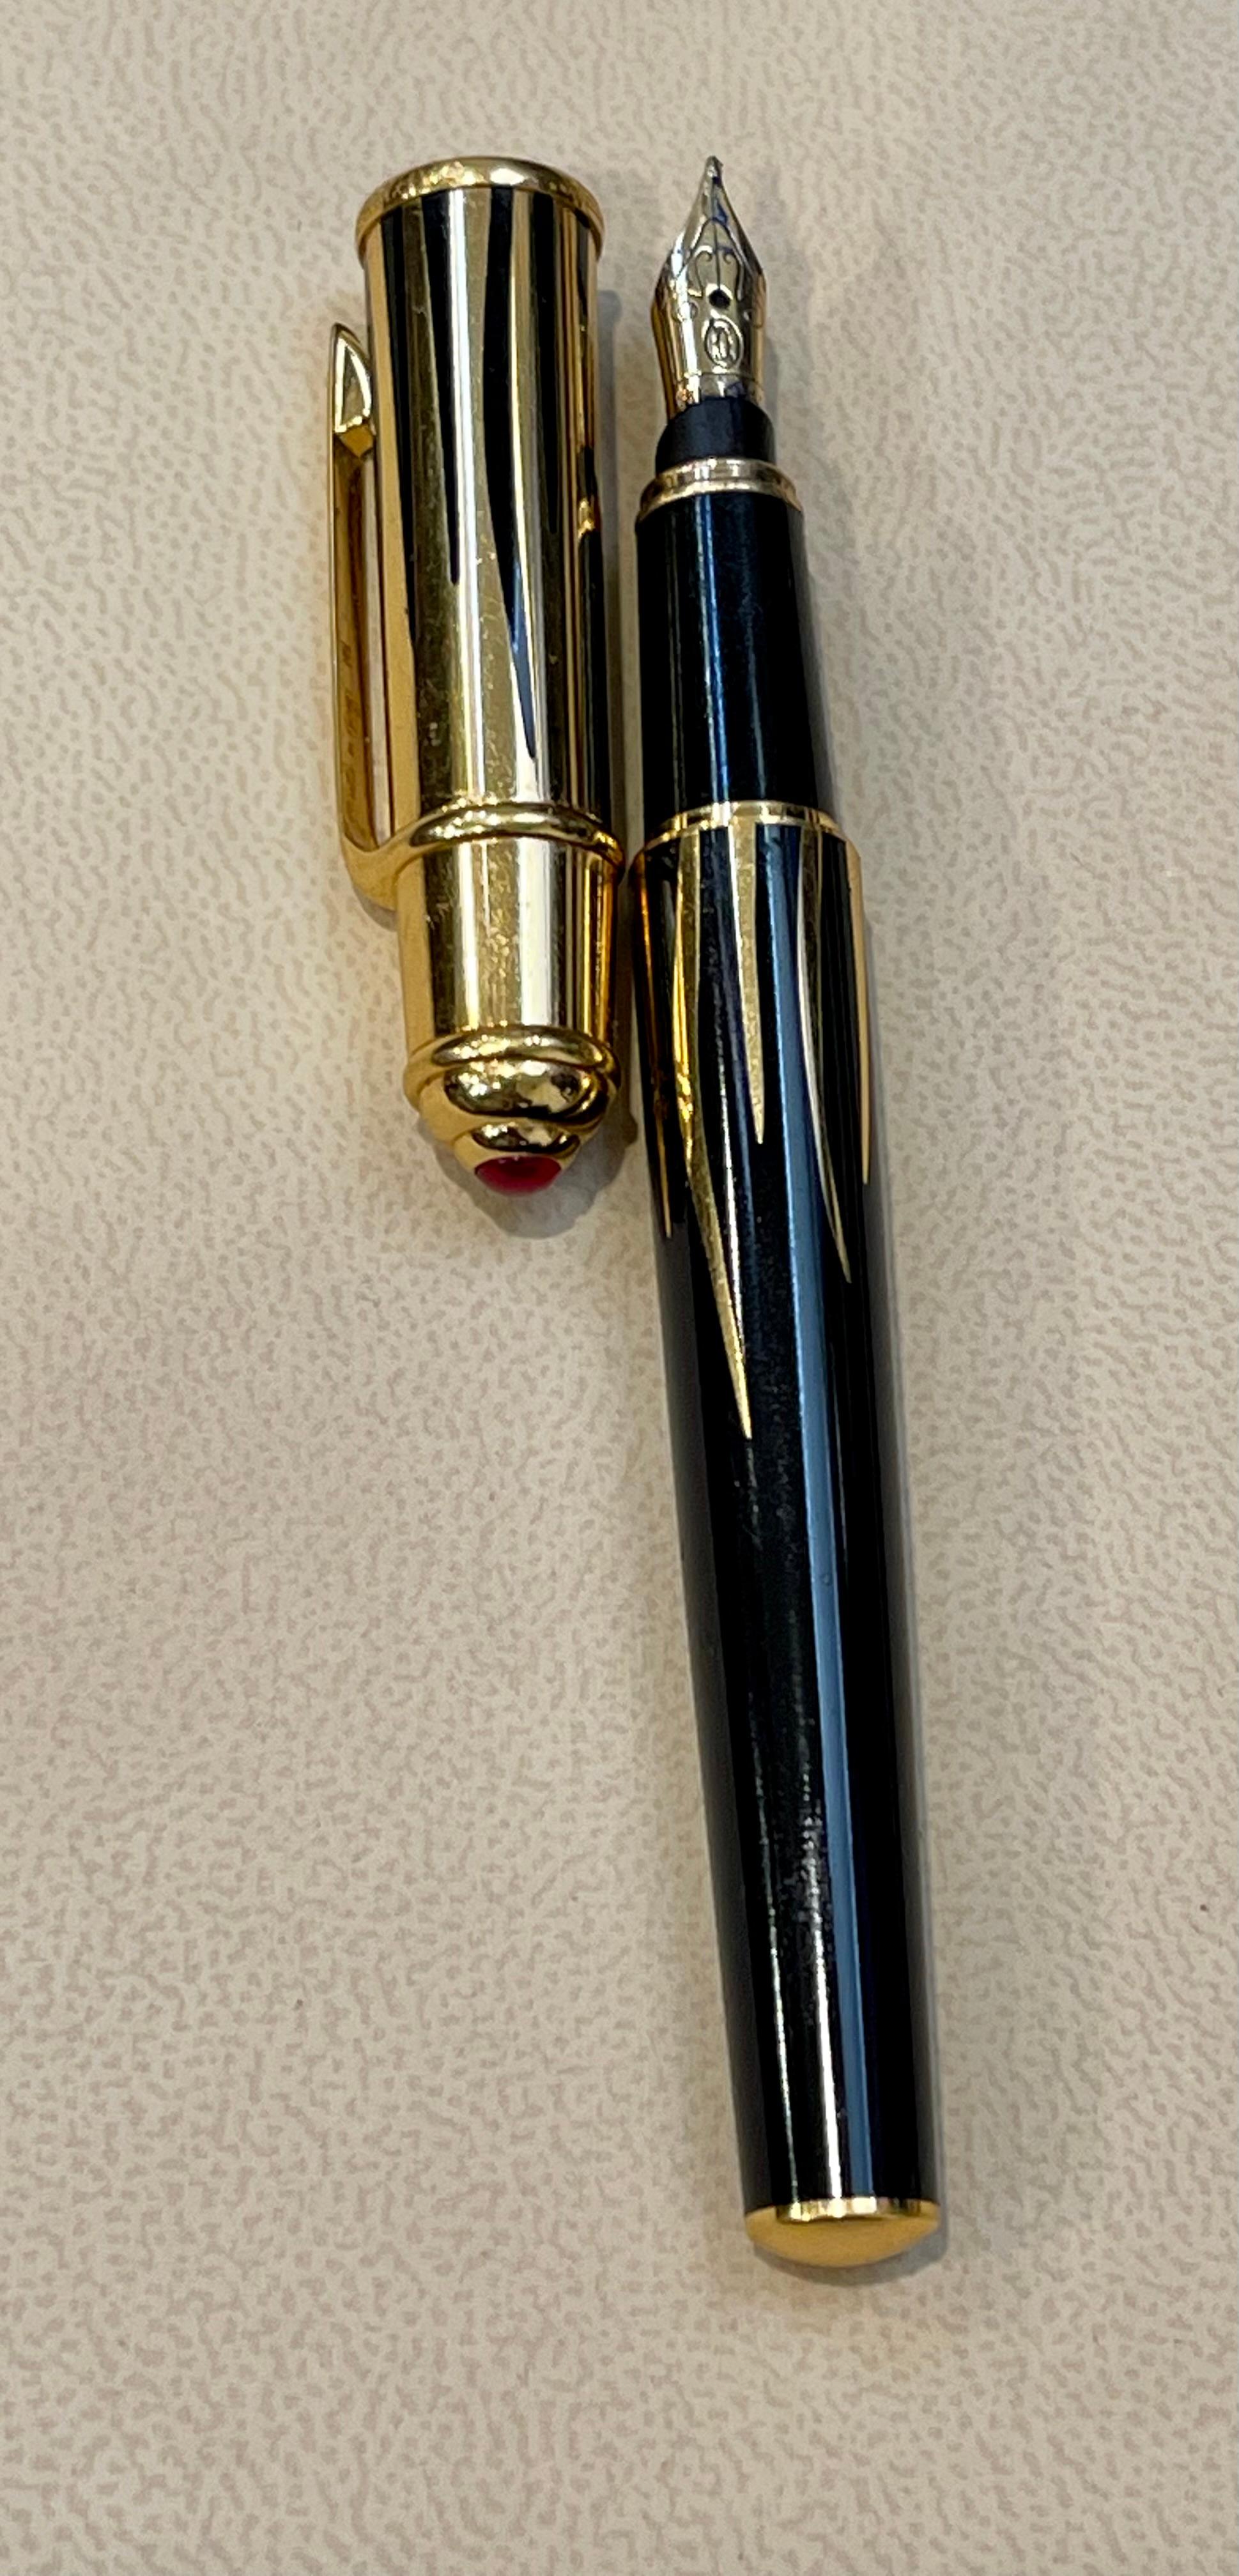 Cartier Diabolo Flames Fountain pen Cartier Mini Diabolo Flames Fountain pen Features a deep black resin body with a brilliant Gold flames designn Red stone. Rare Collector's piece 100 % authentic and Vintage 
Stamped Cartier  011253  
No Ink in the